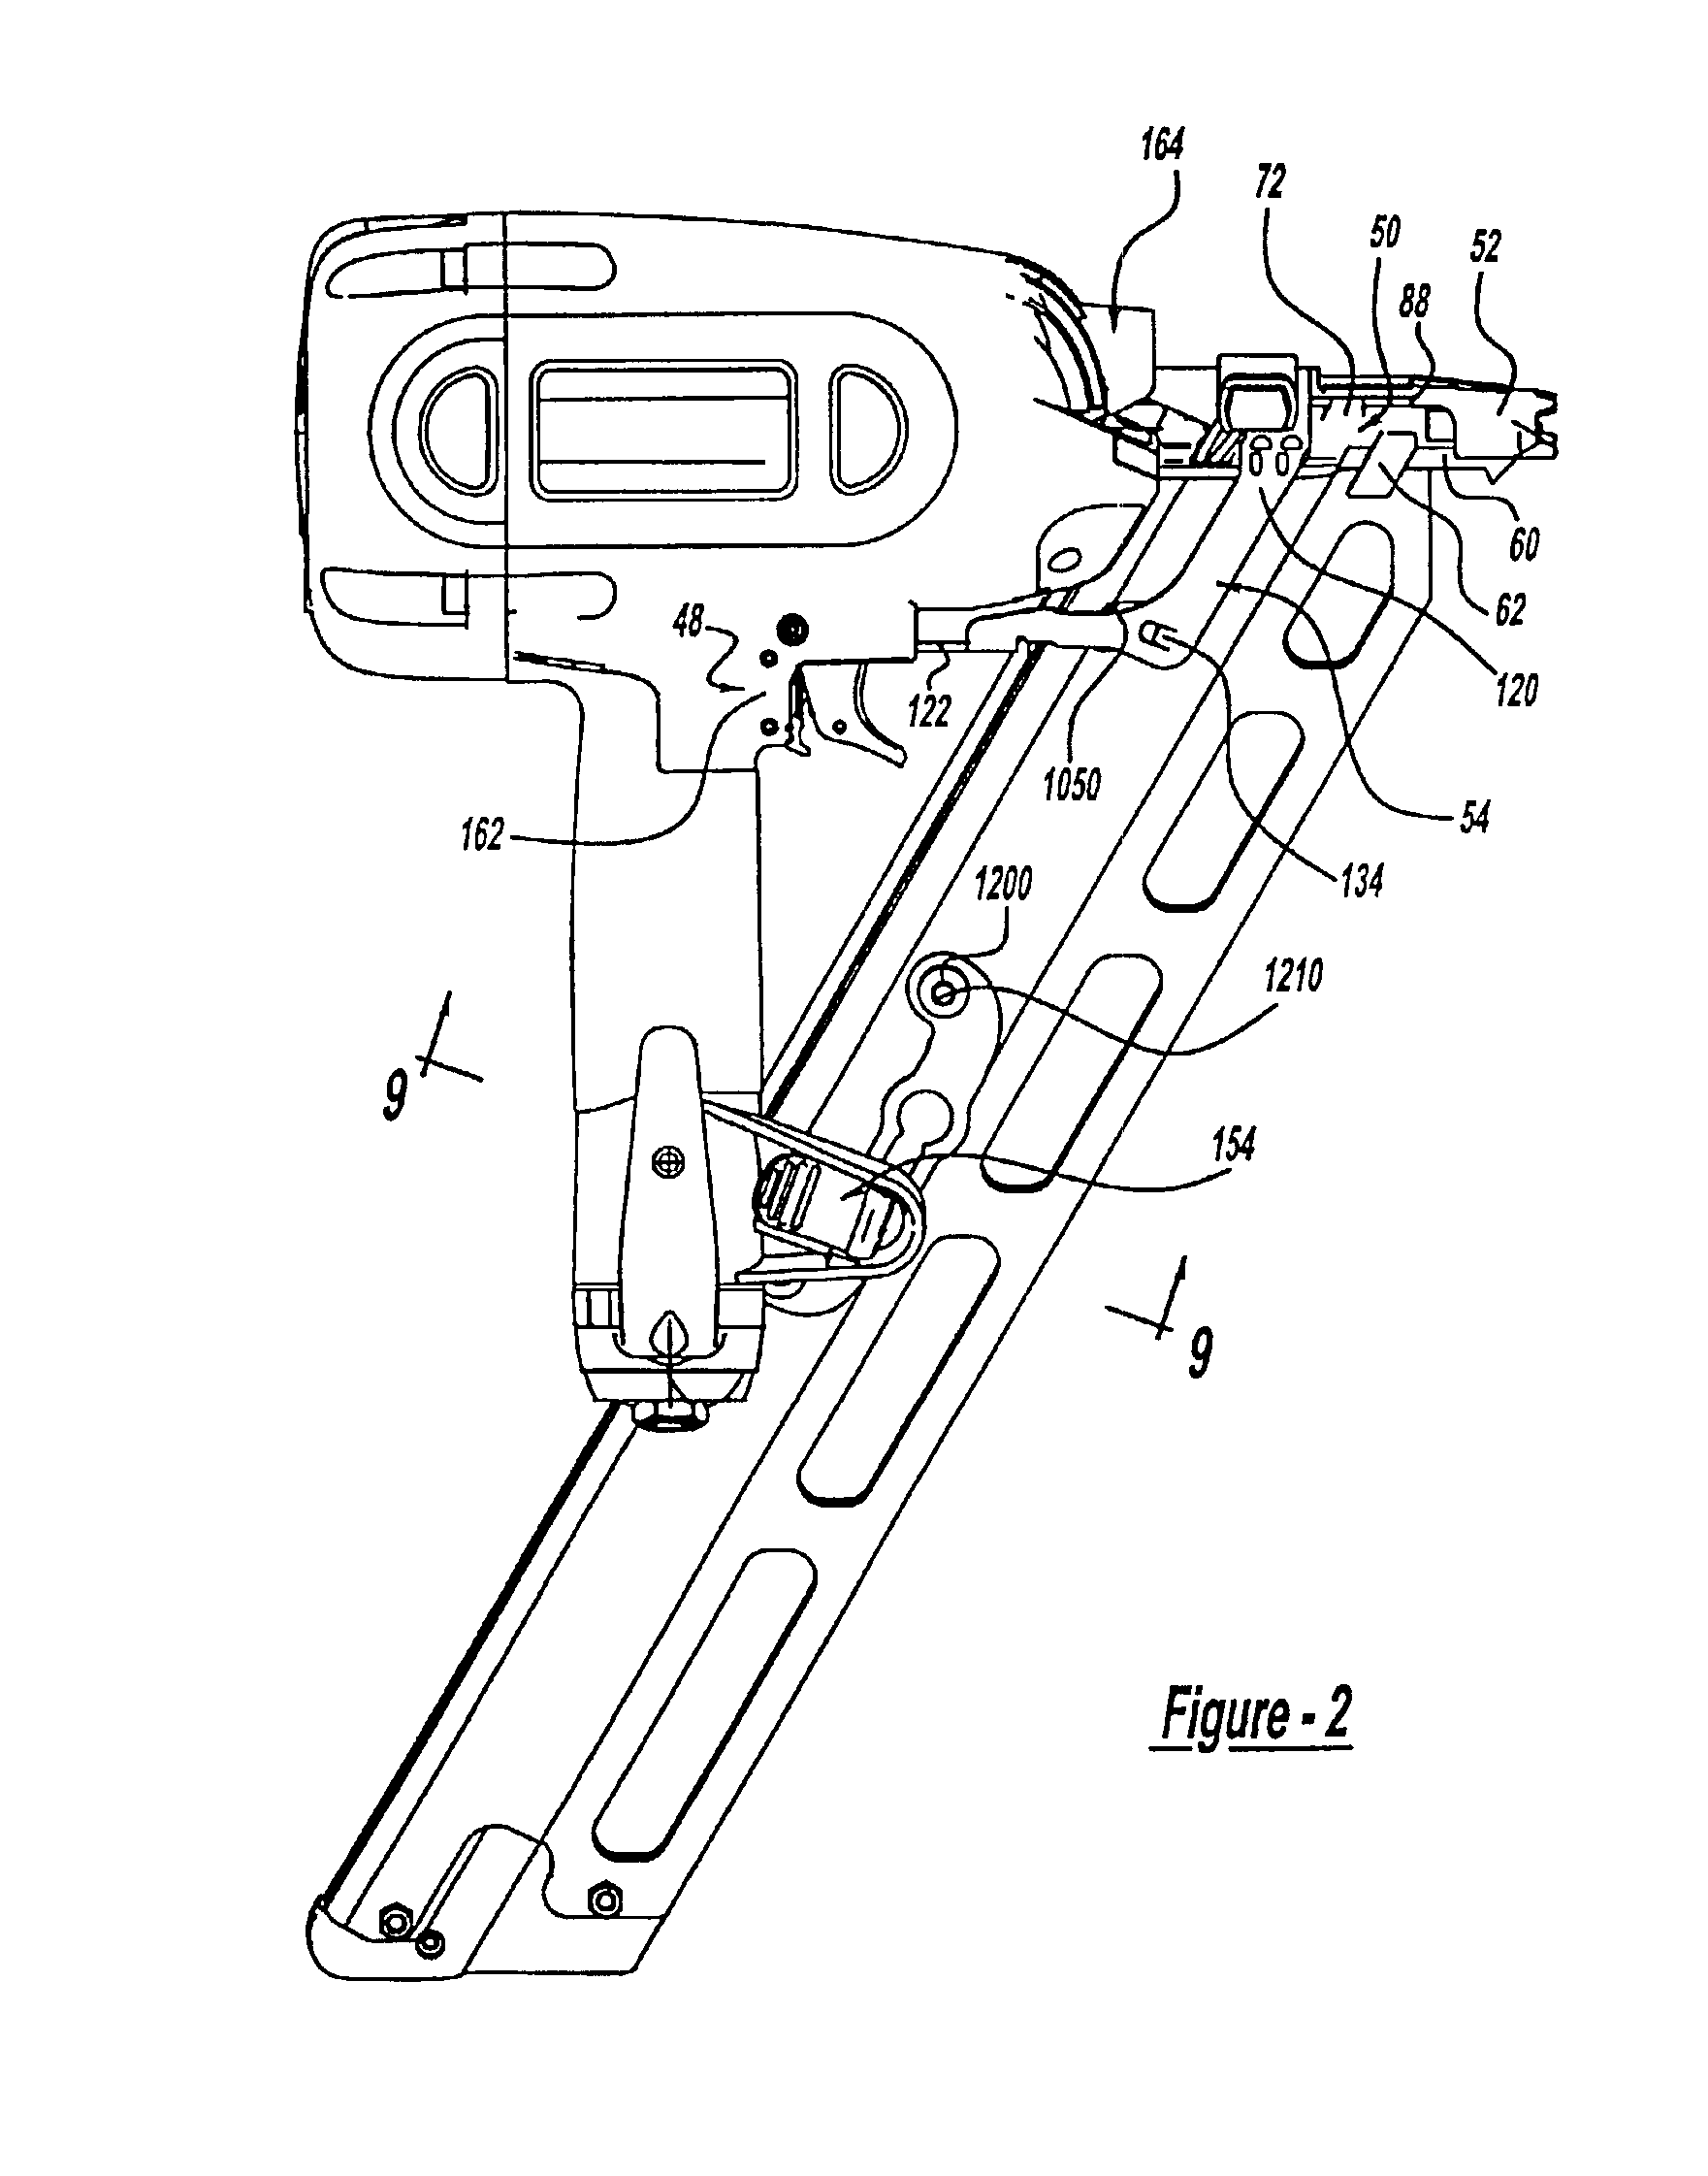 Magazine assembly for fastening tool